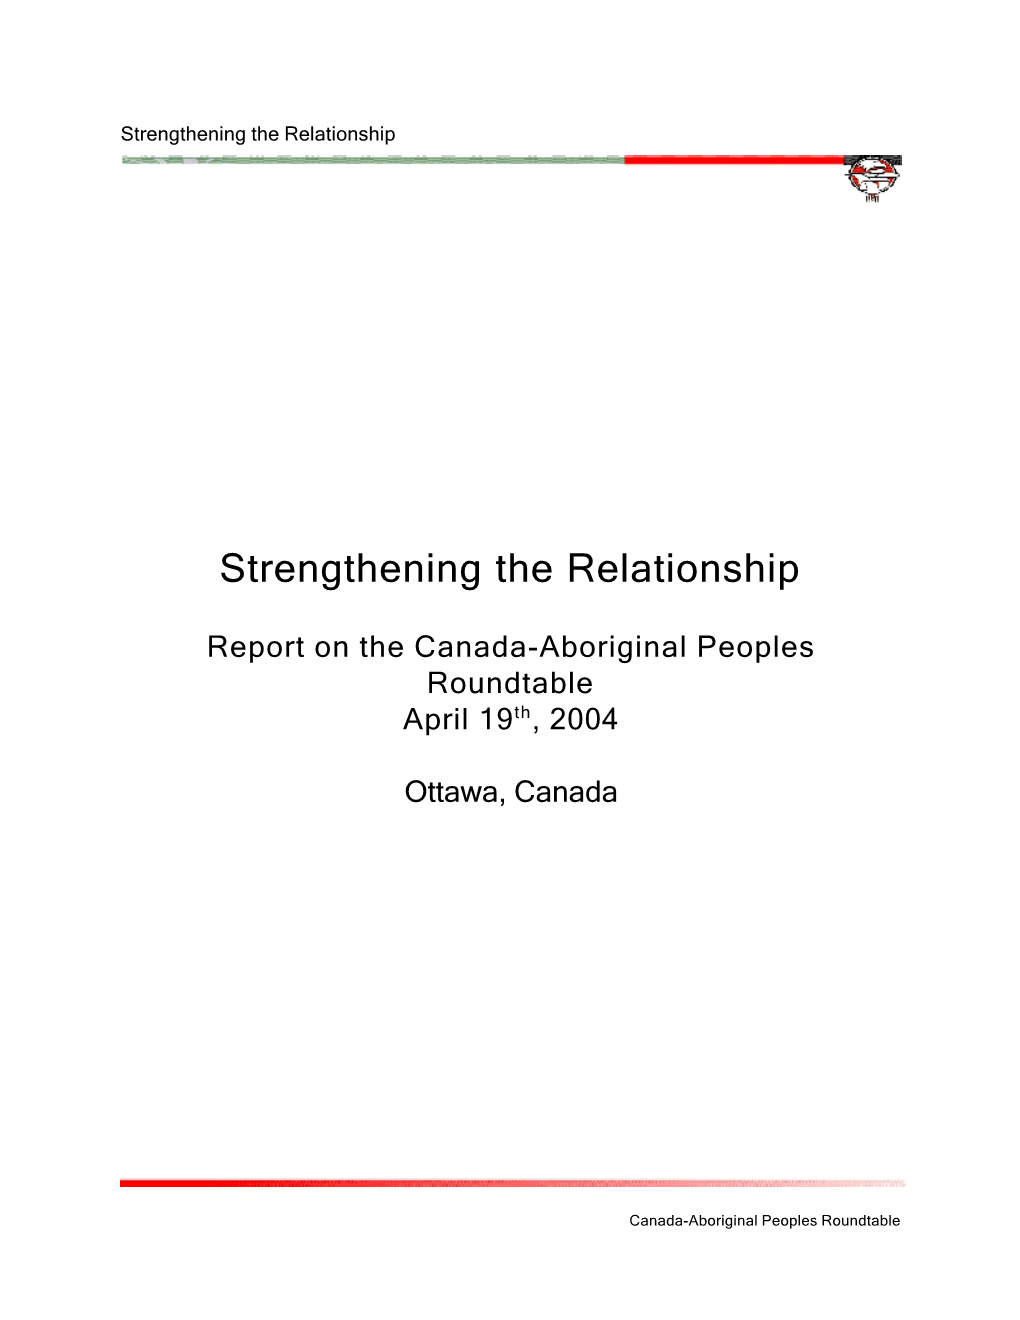 Strengthening the Relationship Report on the Canada-Aboriginal Peoples